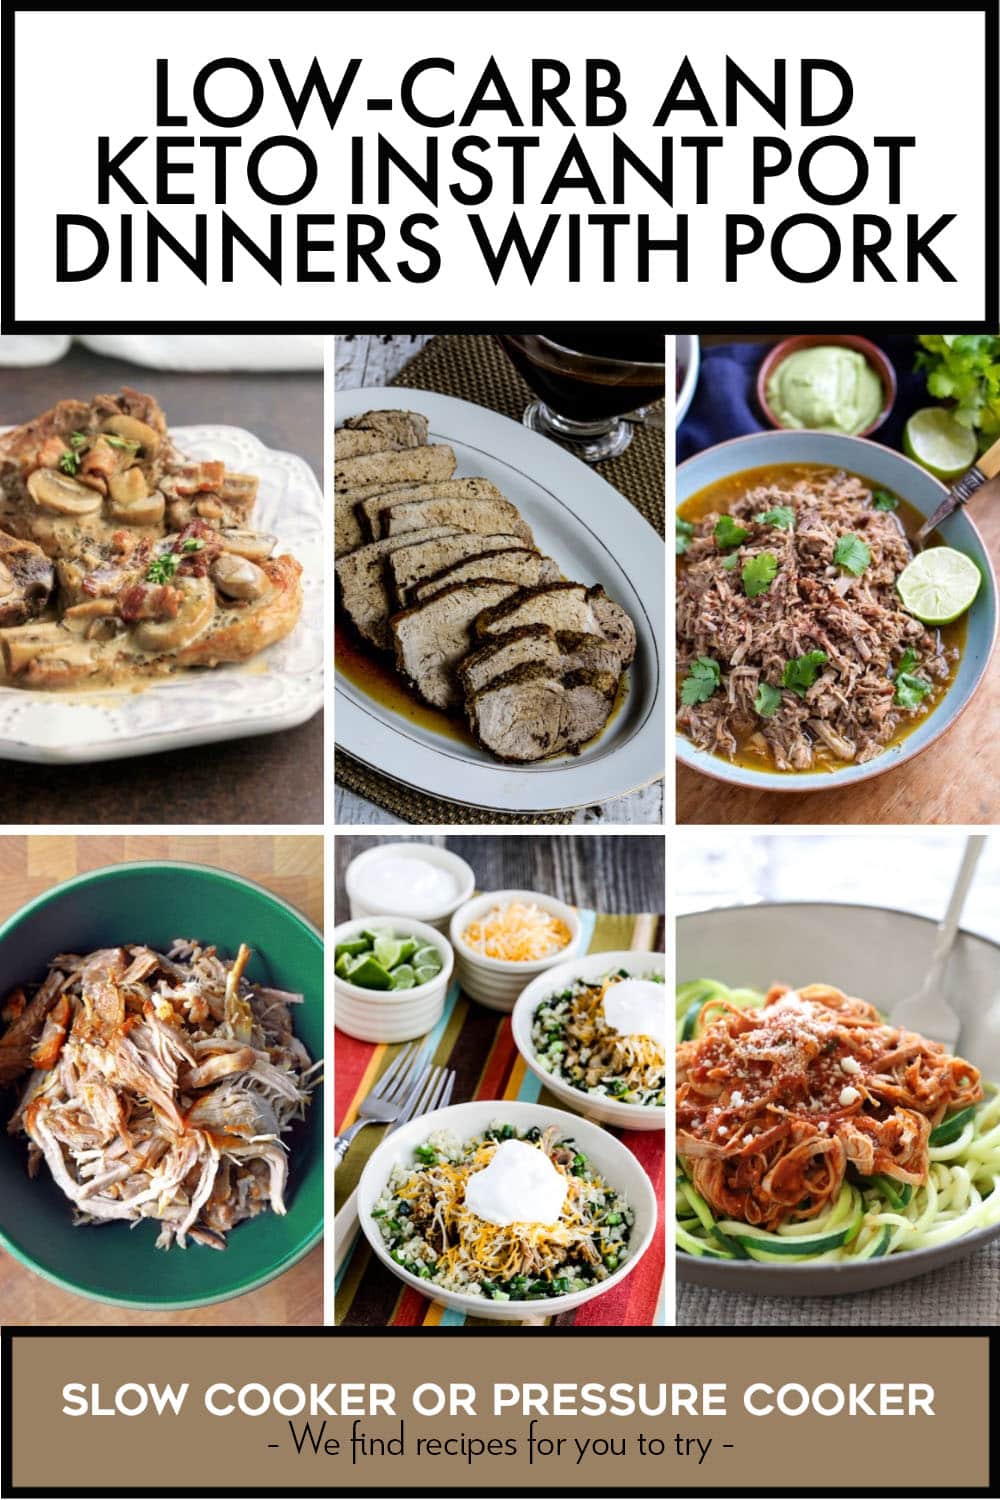 Pinterest image of Low-Carb and Keto Instant Pot Dinners with Pork